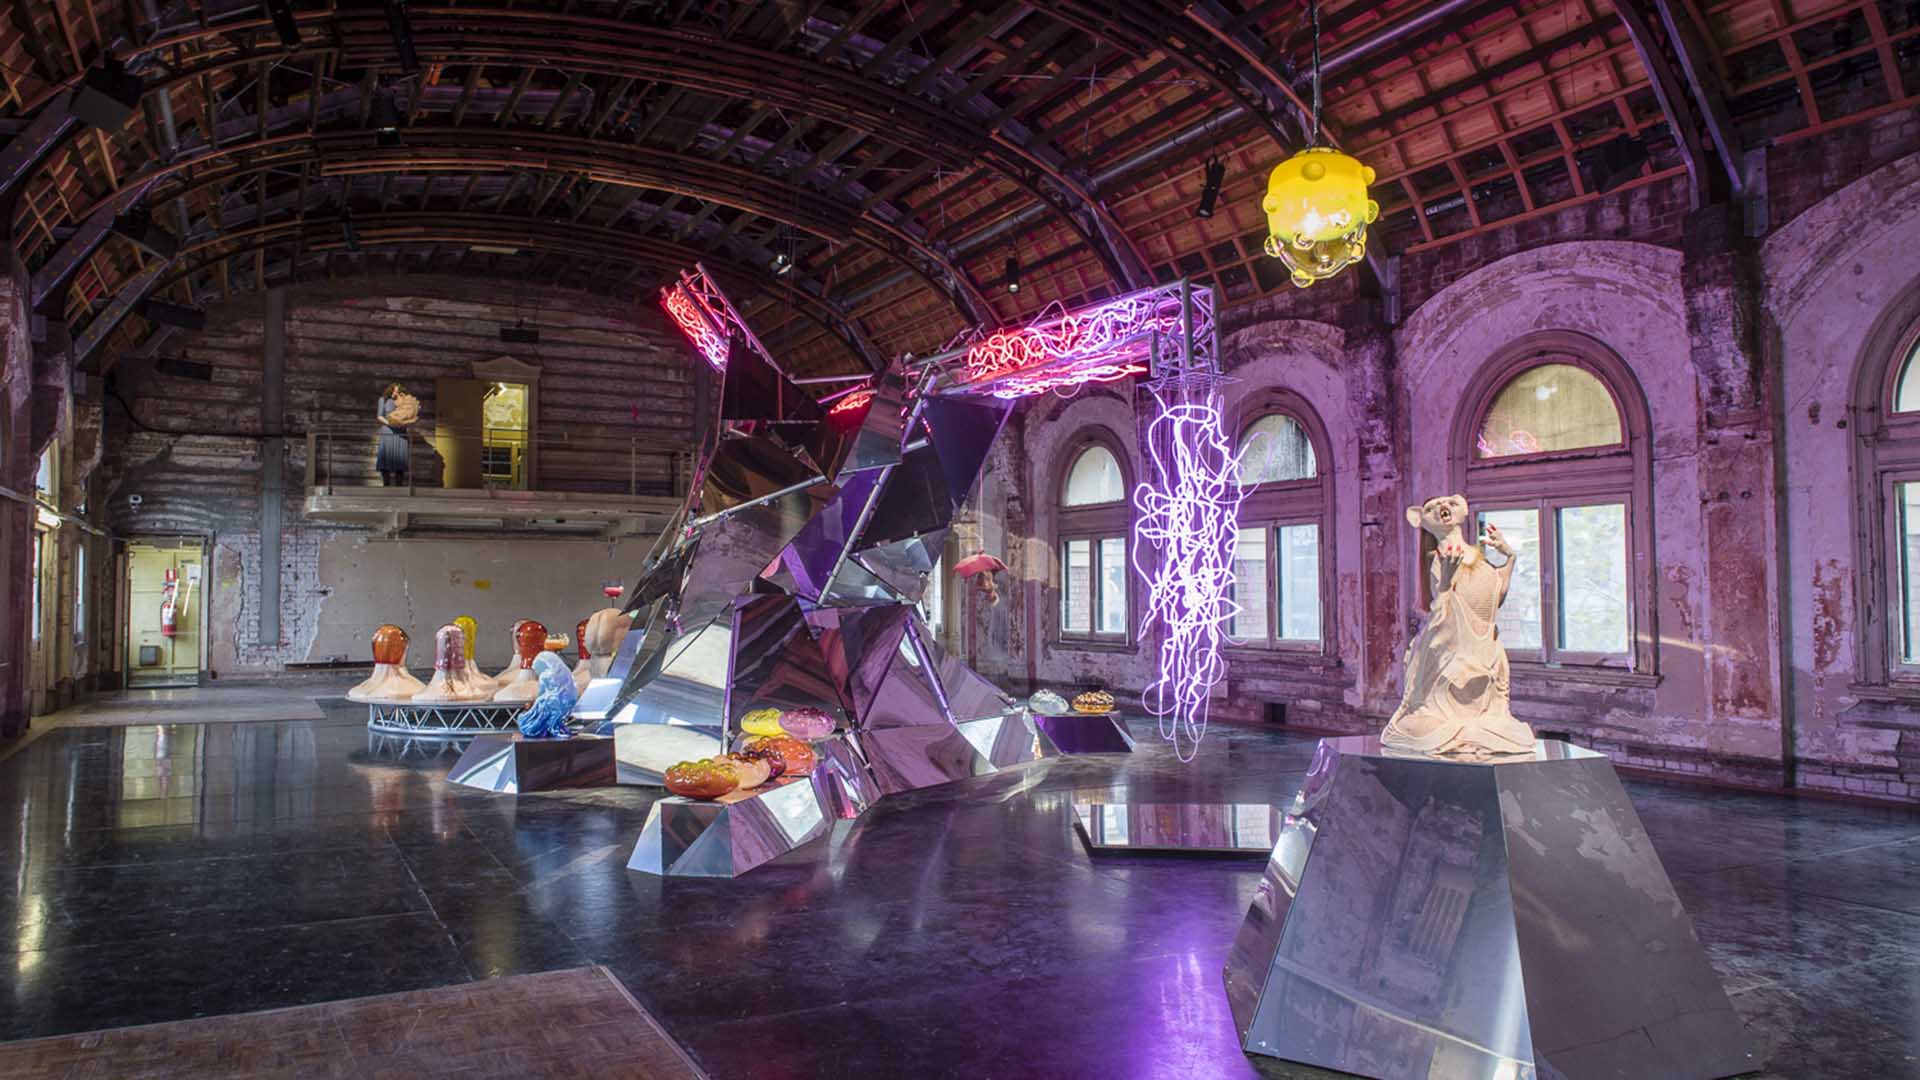 Patricia Piccinini's Latest Exhibition Is Taking Over Flinders Street Station Ballroom Until January